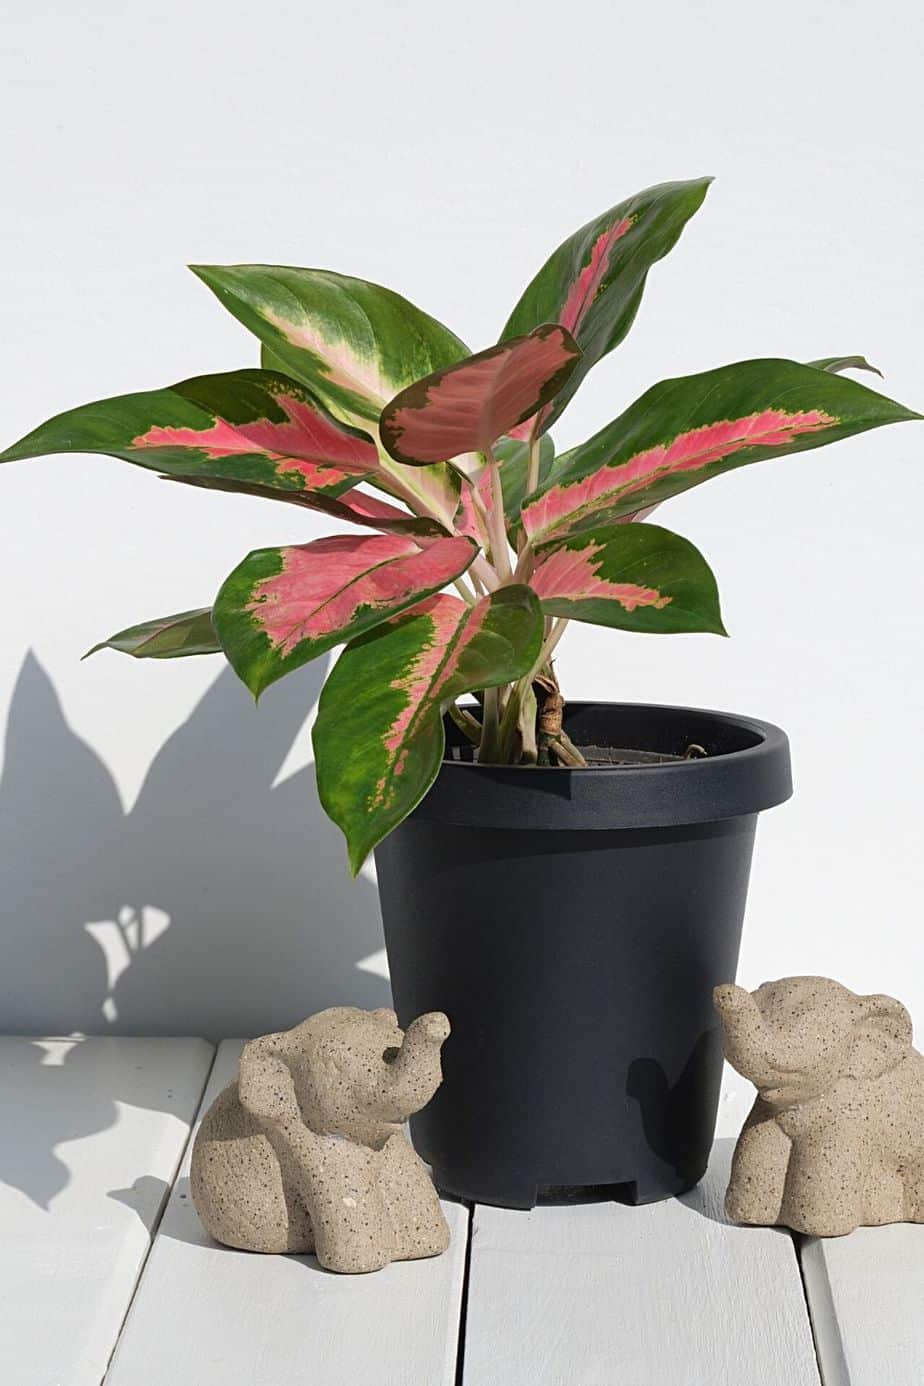 If you want to add a plant with a splash of red on your northeast-facing window, the Chinese evergreen is your plant of choice